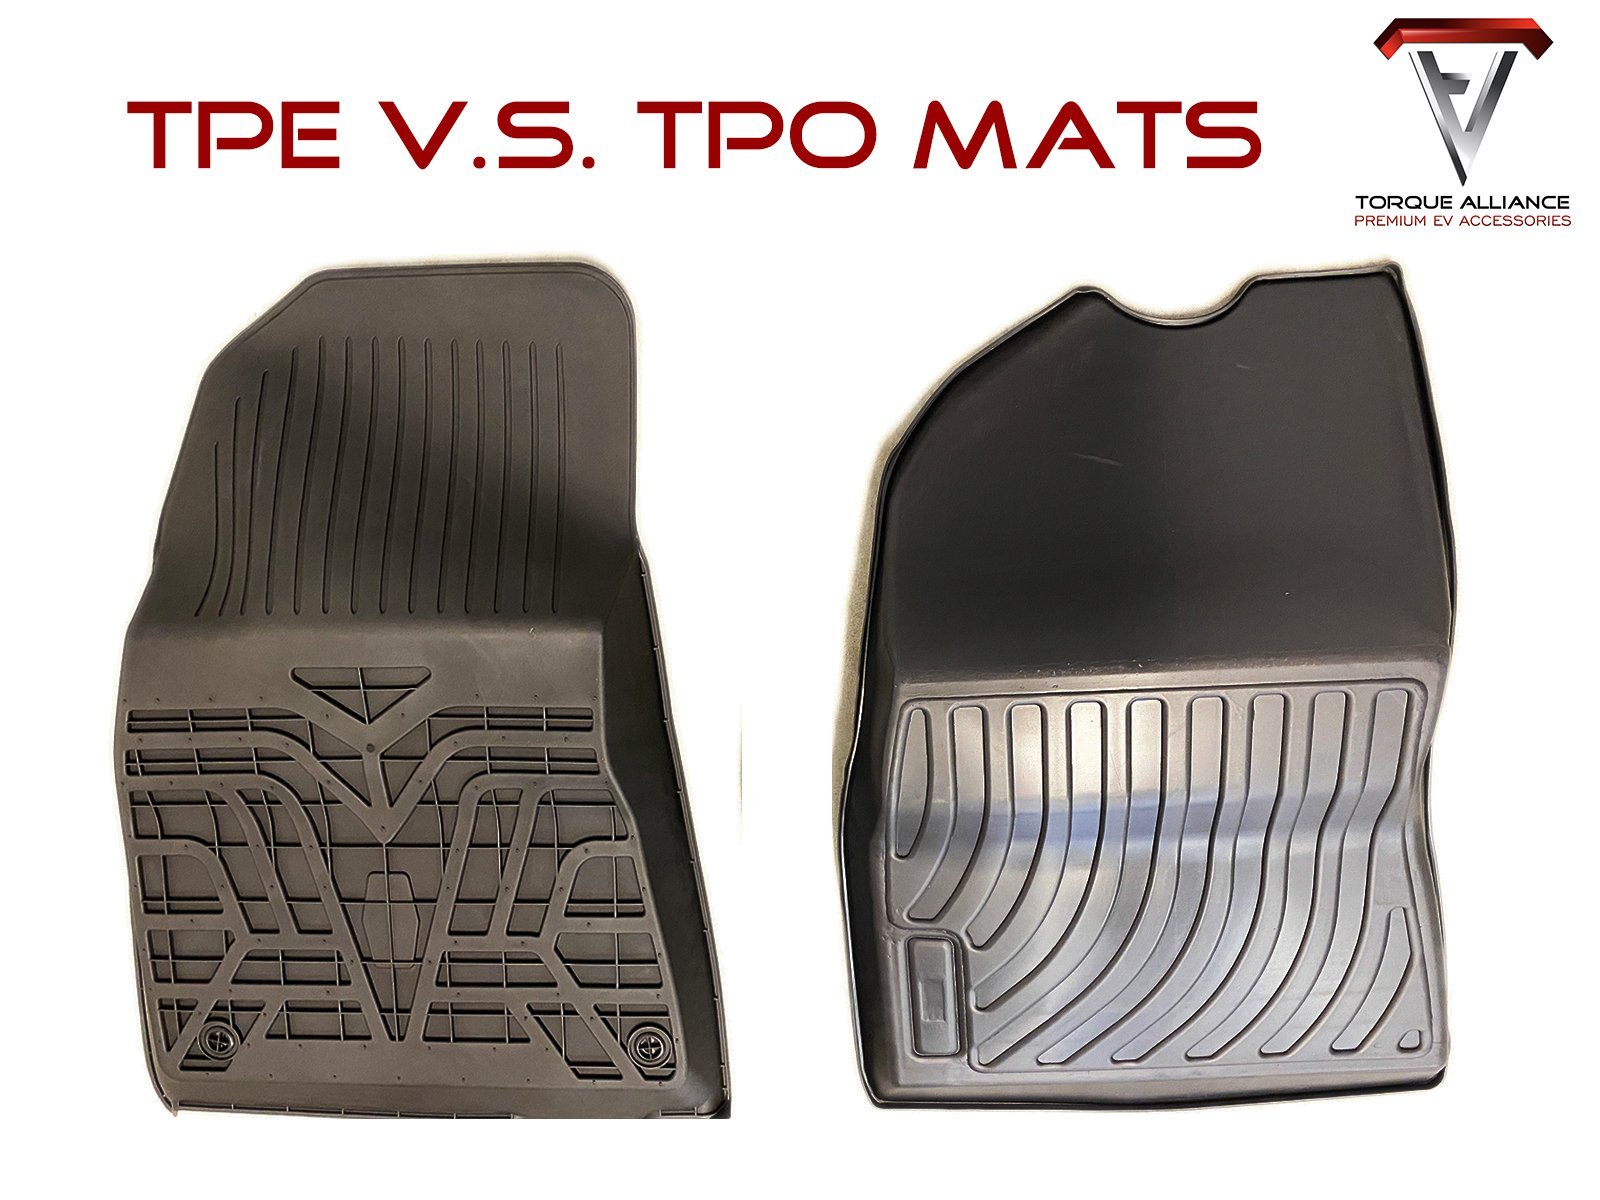 TPR vs. TPE: Material Differences and Comparisons